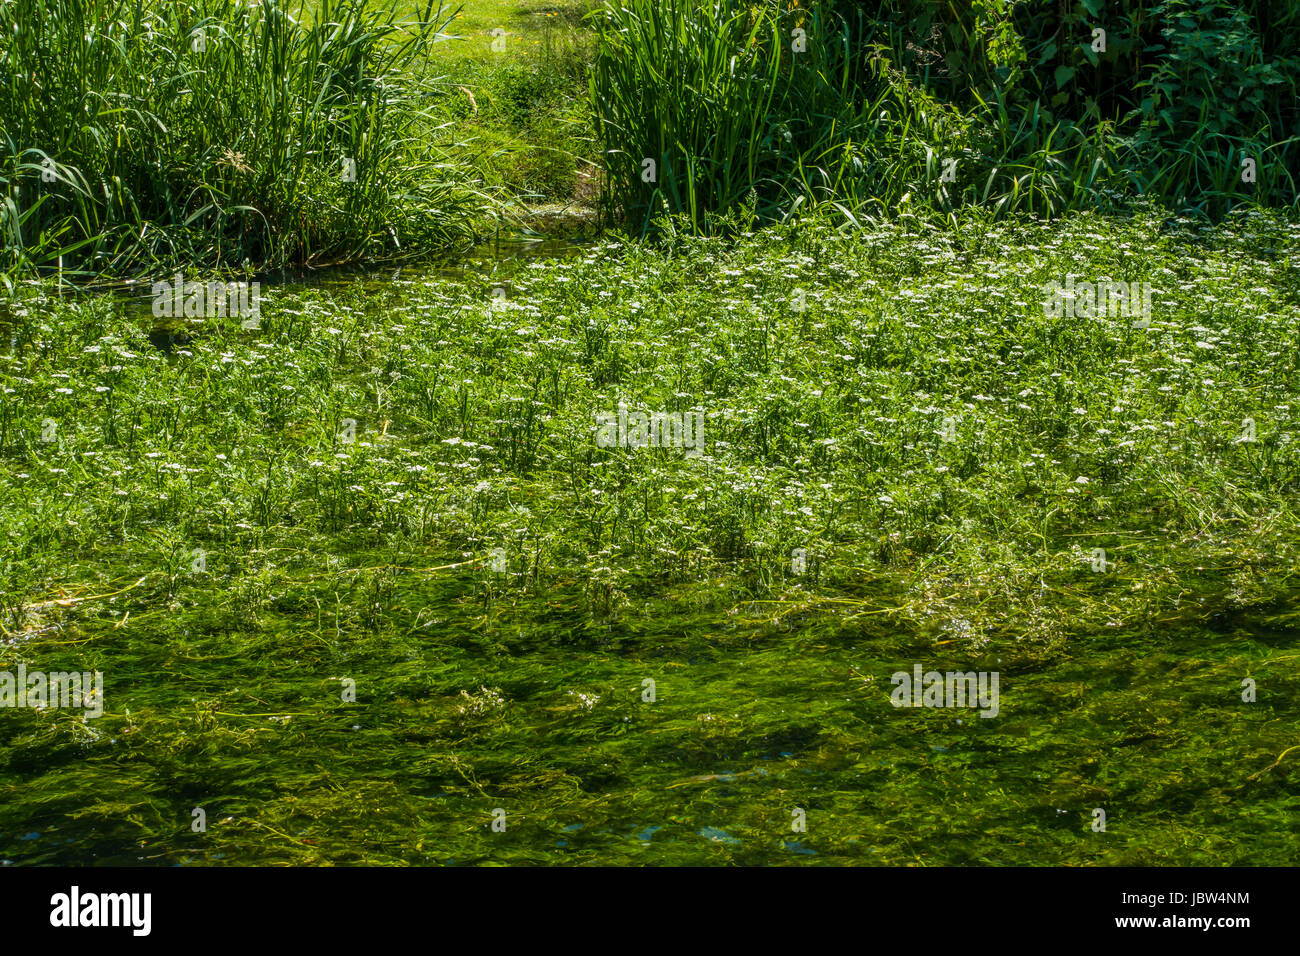 Invasive weed clogging,Weed infested River,Great Stour,River,Canterbury,Kent,England Stock Photo